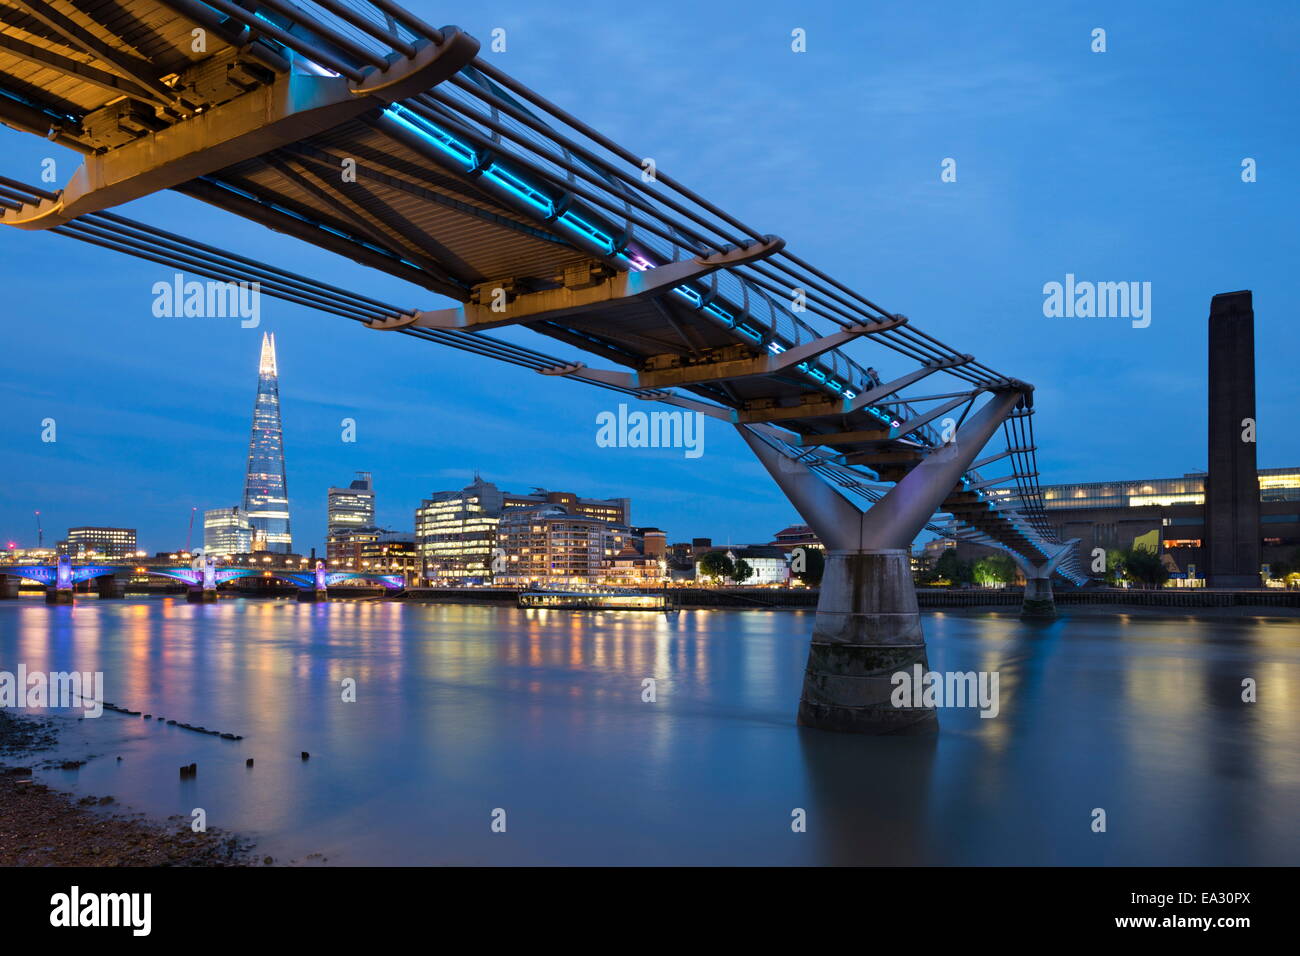 View over the River Thames with the Millennium Bridge and Tate Modern and The Shard, London, England, United Kingdom, Europe Stock Photo